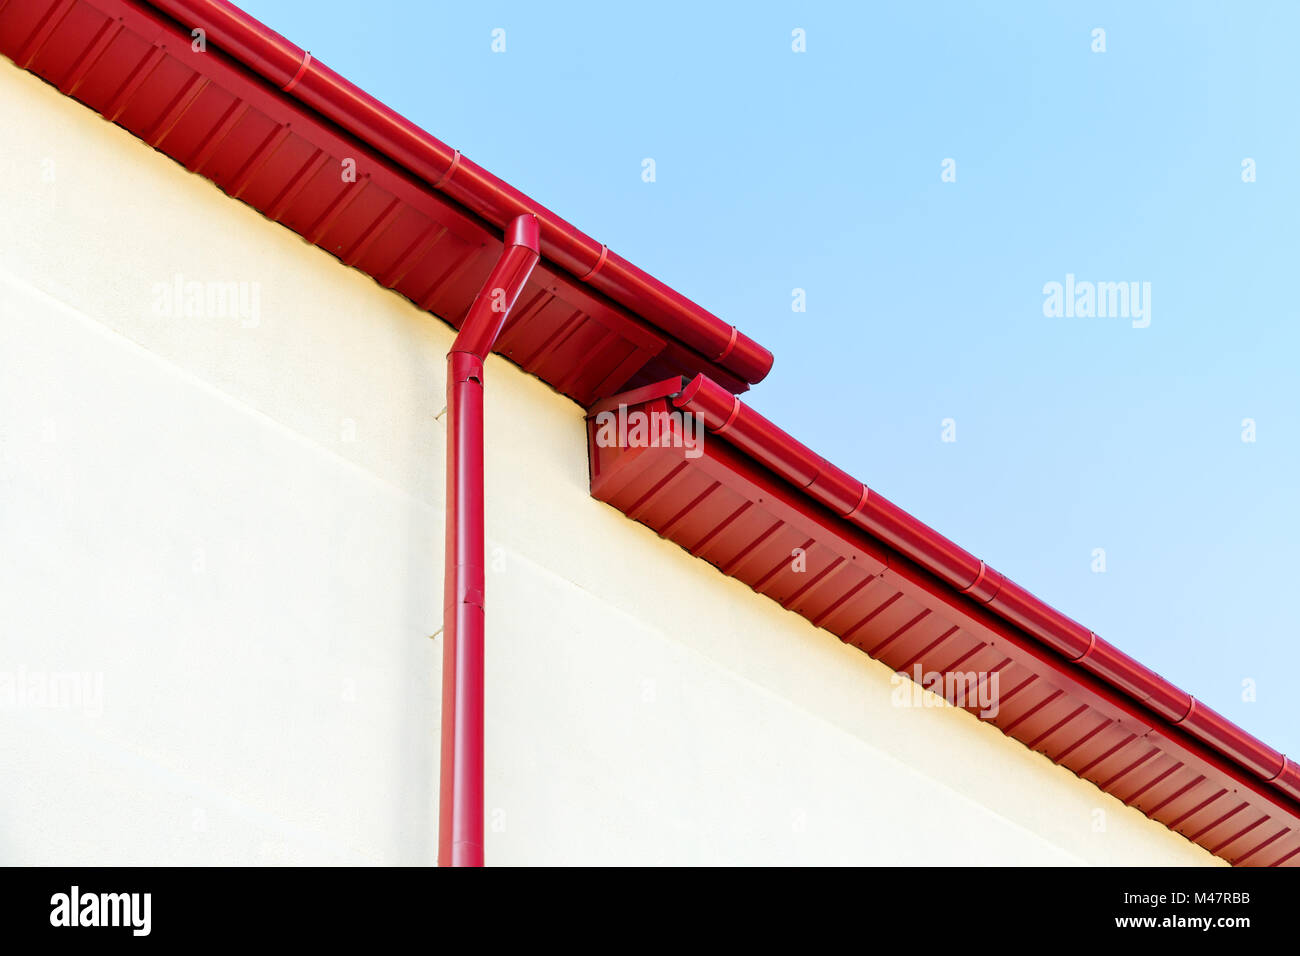 red rain gutter system on rooftop Stock Photo